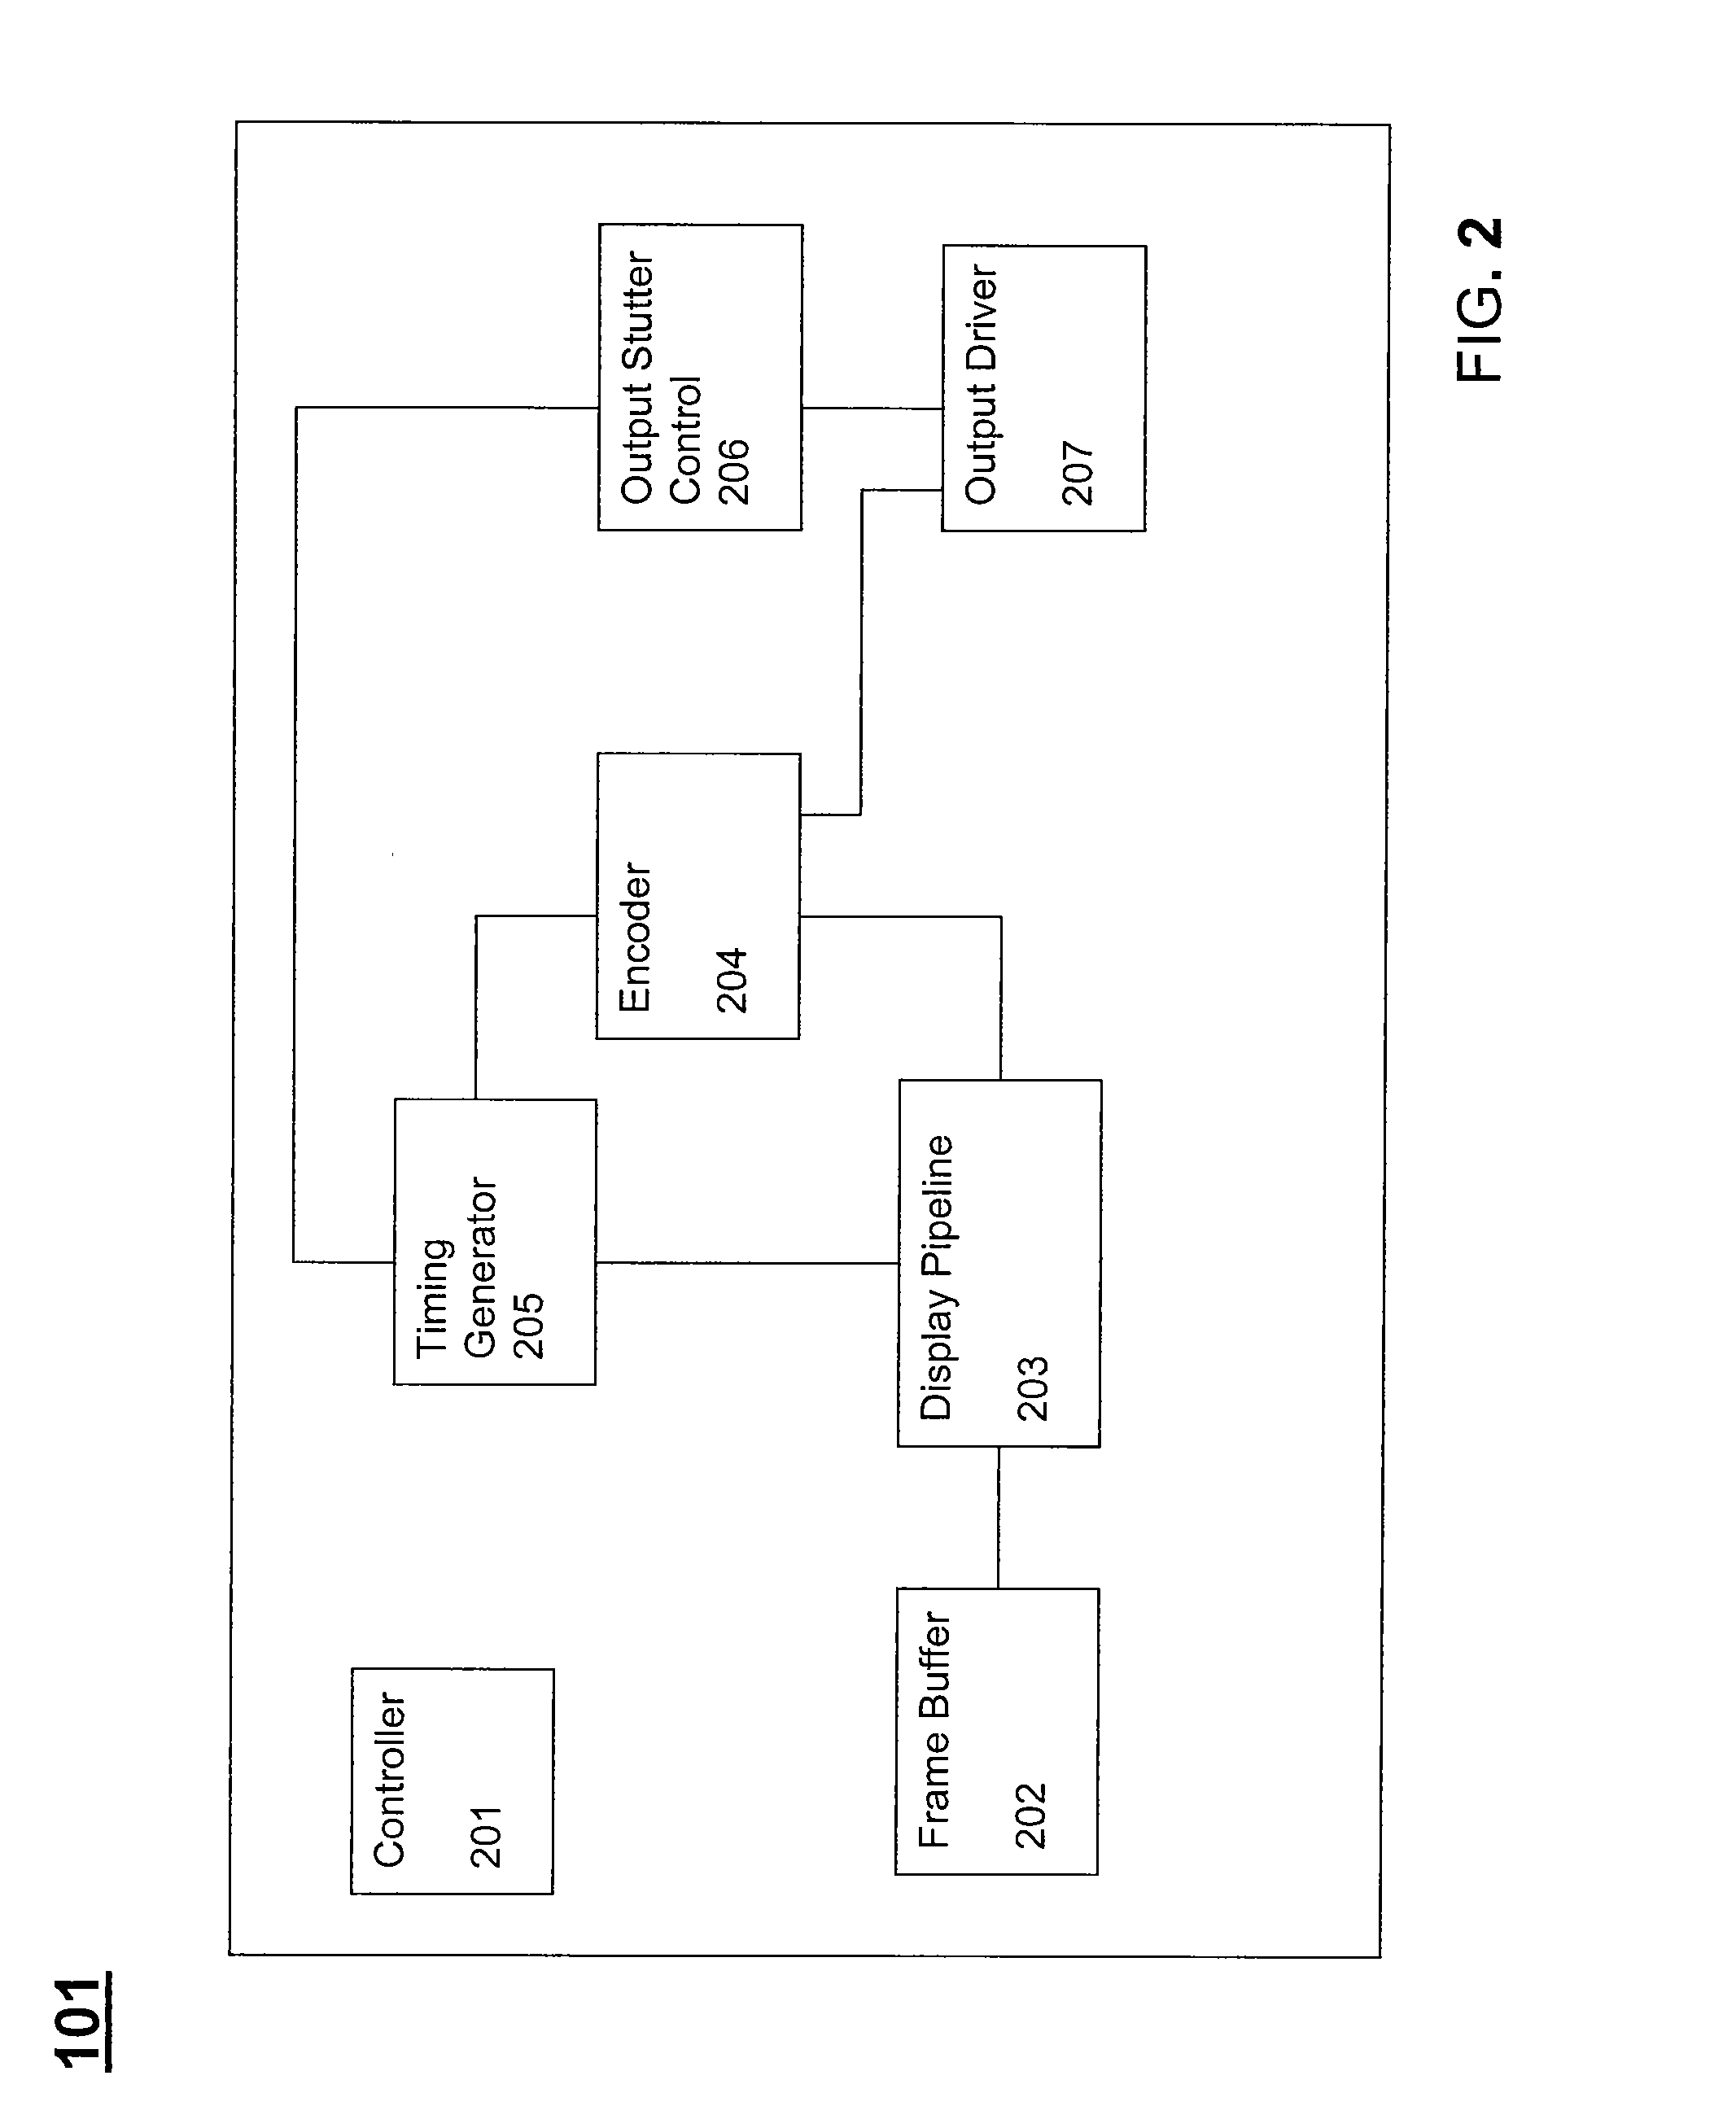 Method and System for Displya Output Stutter